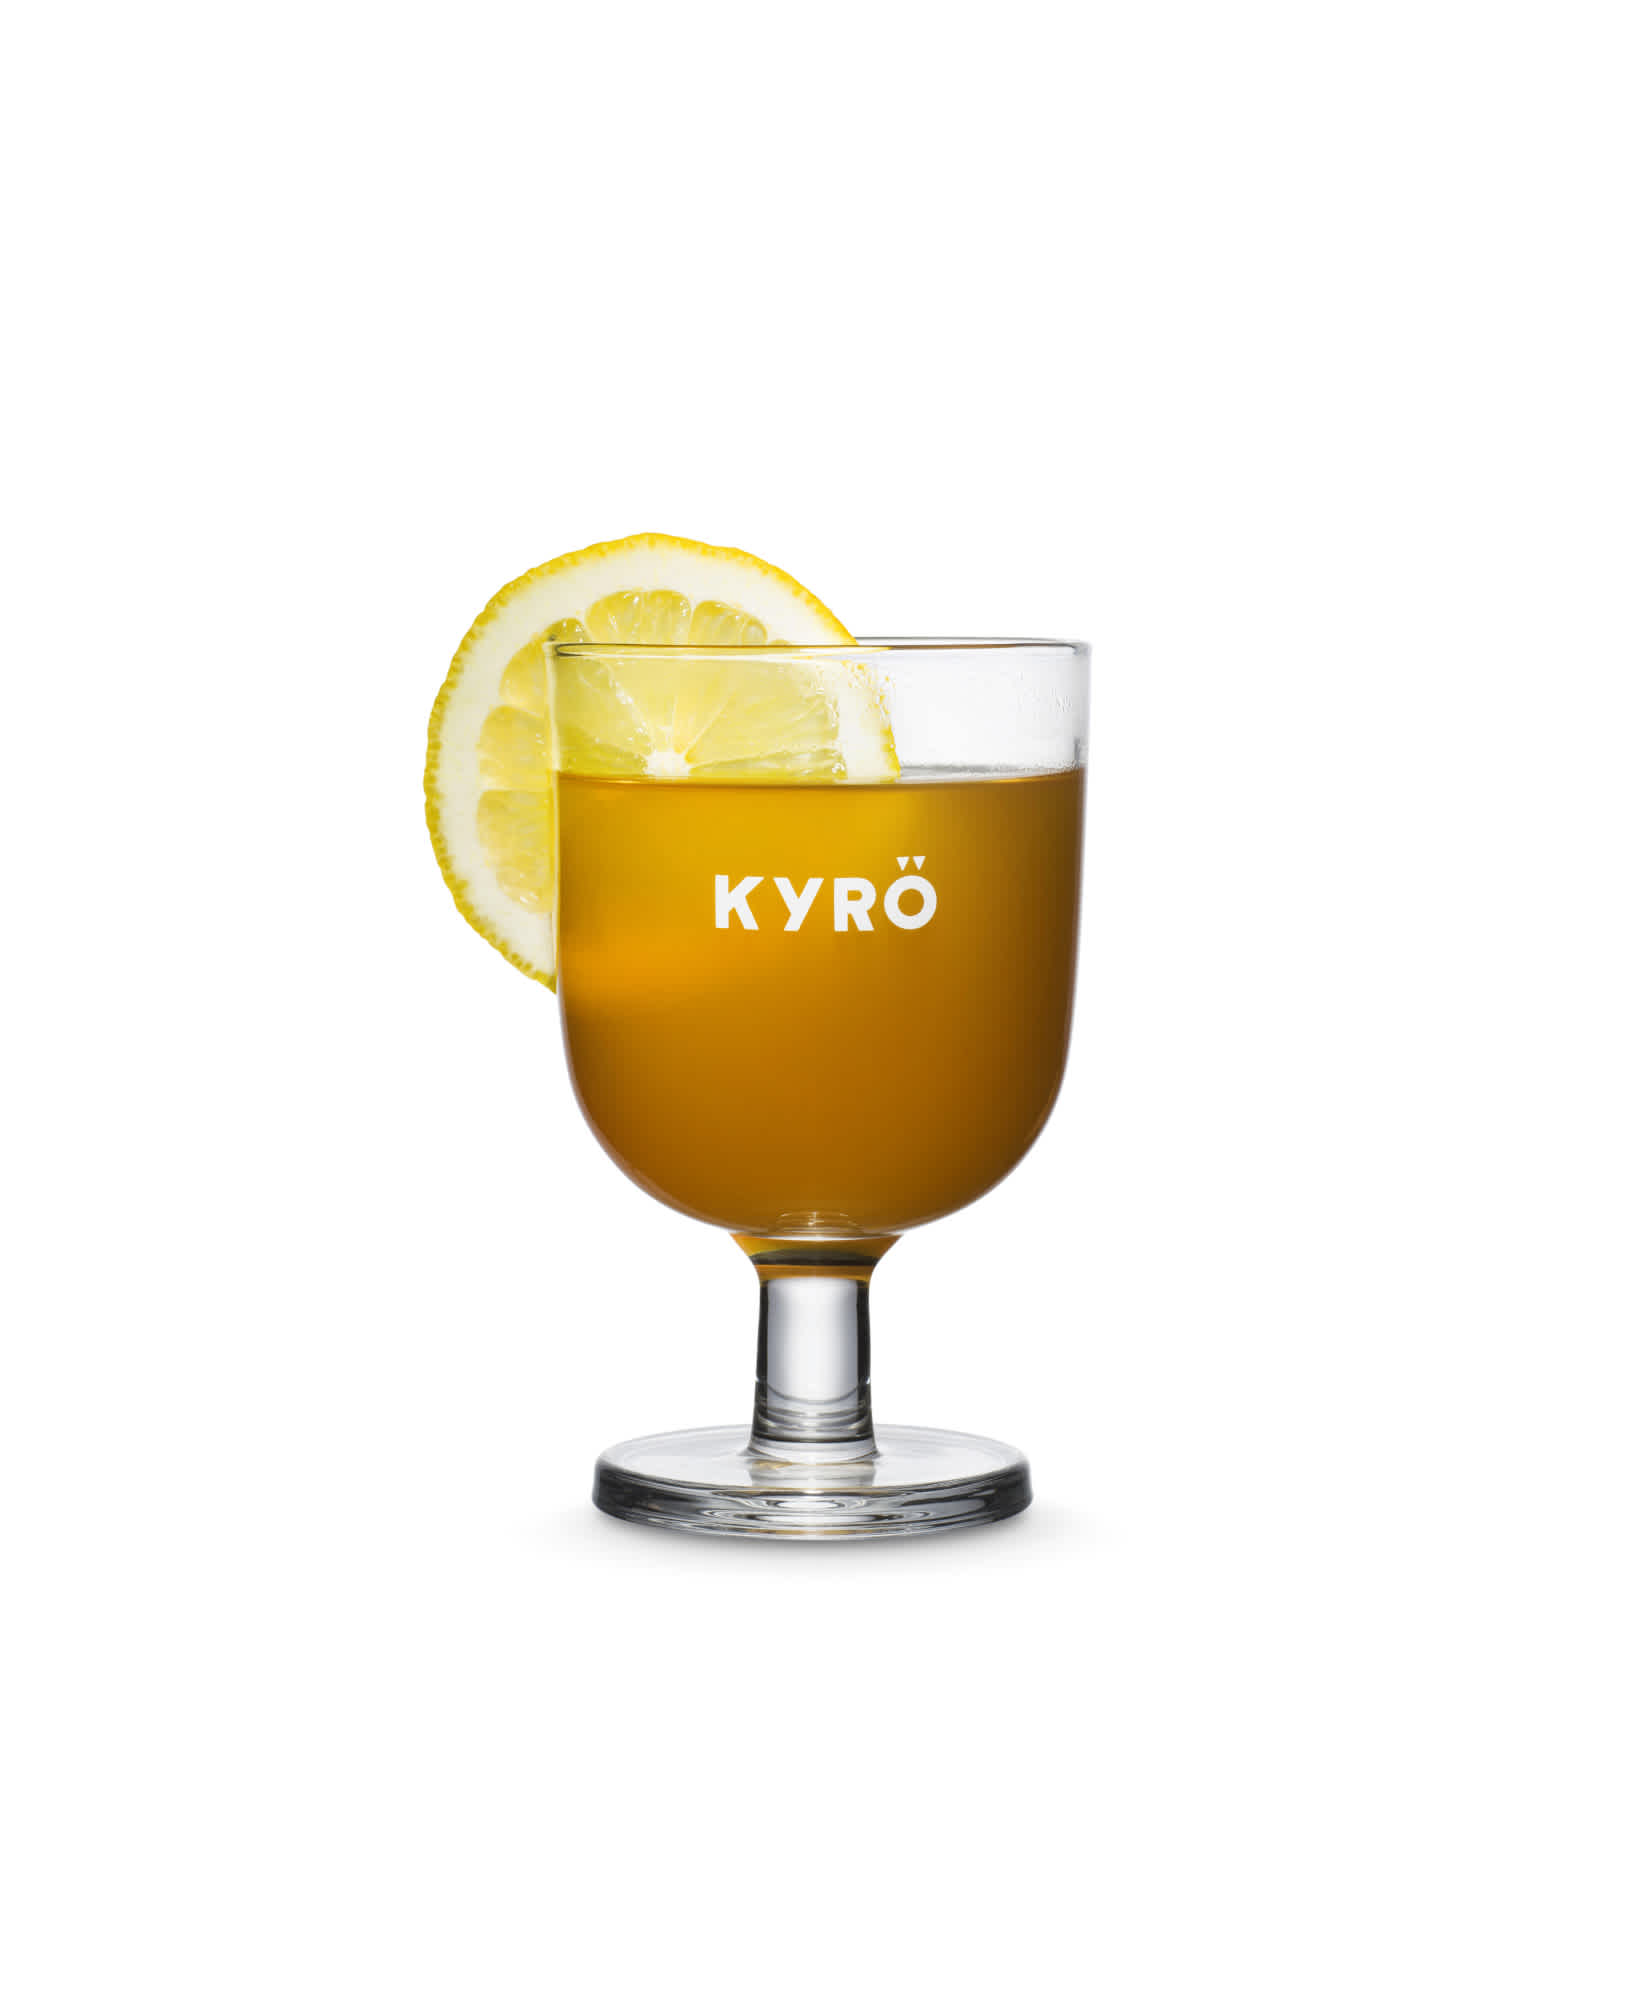 Hot Toddy warm cocktail with rye whisky, tea and lemon garnish. Served in a cocktail glass with Kyrö Distillery logo.